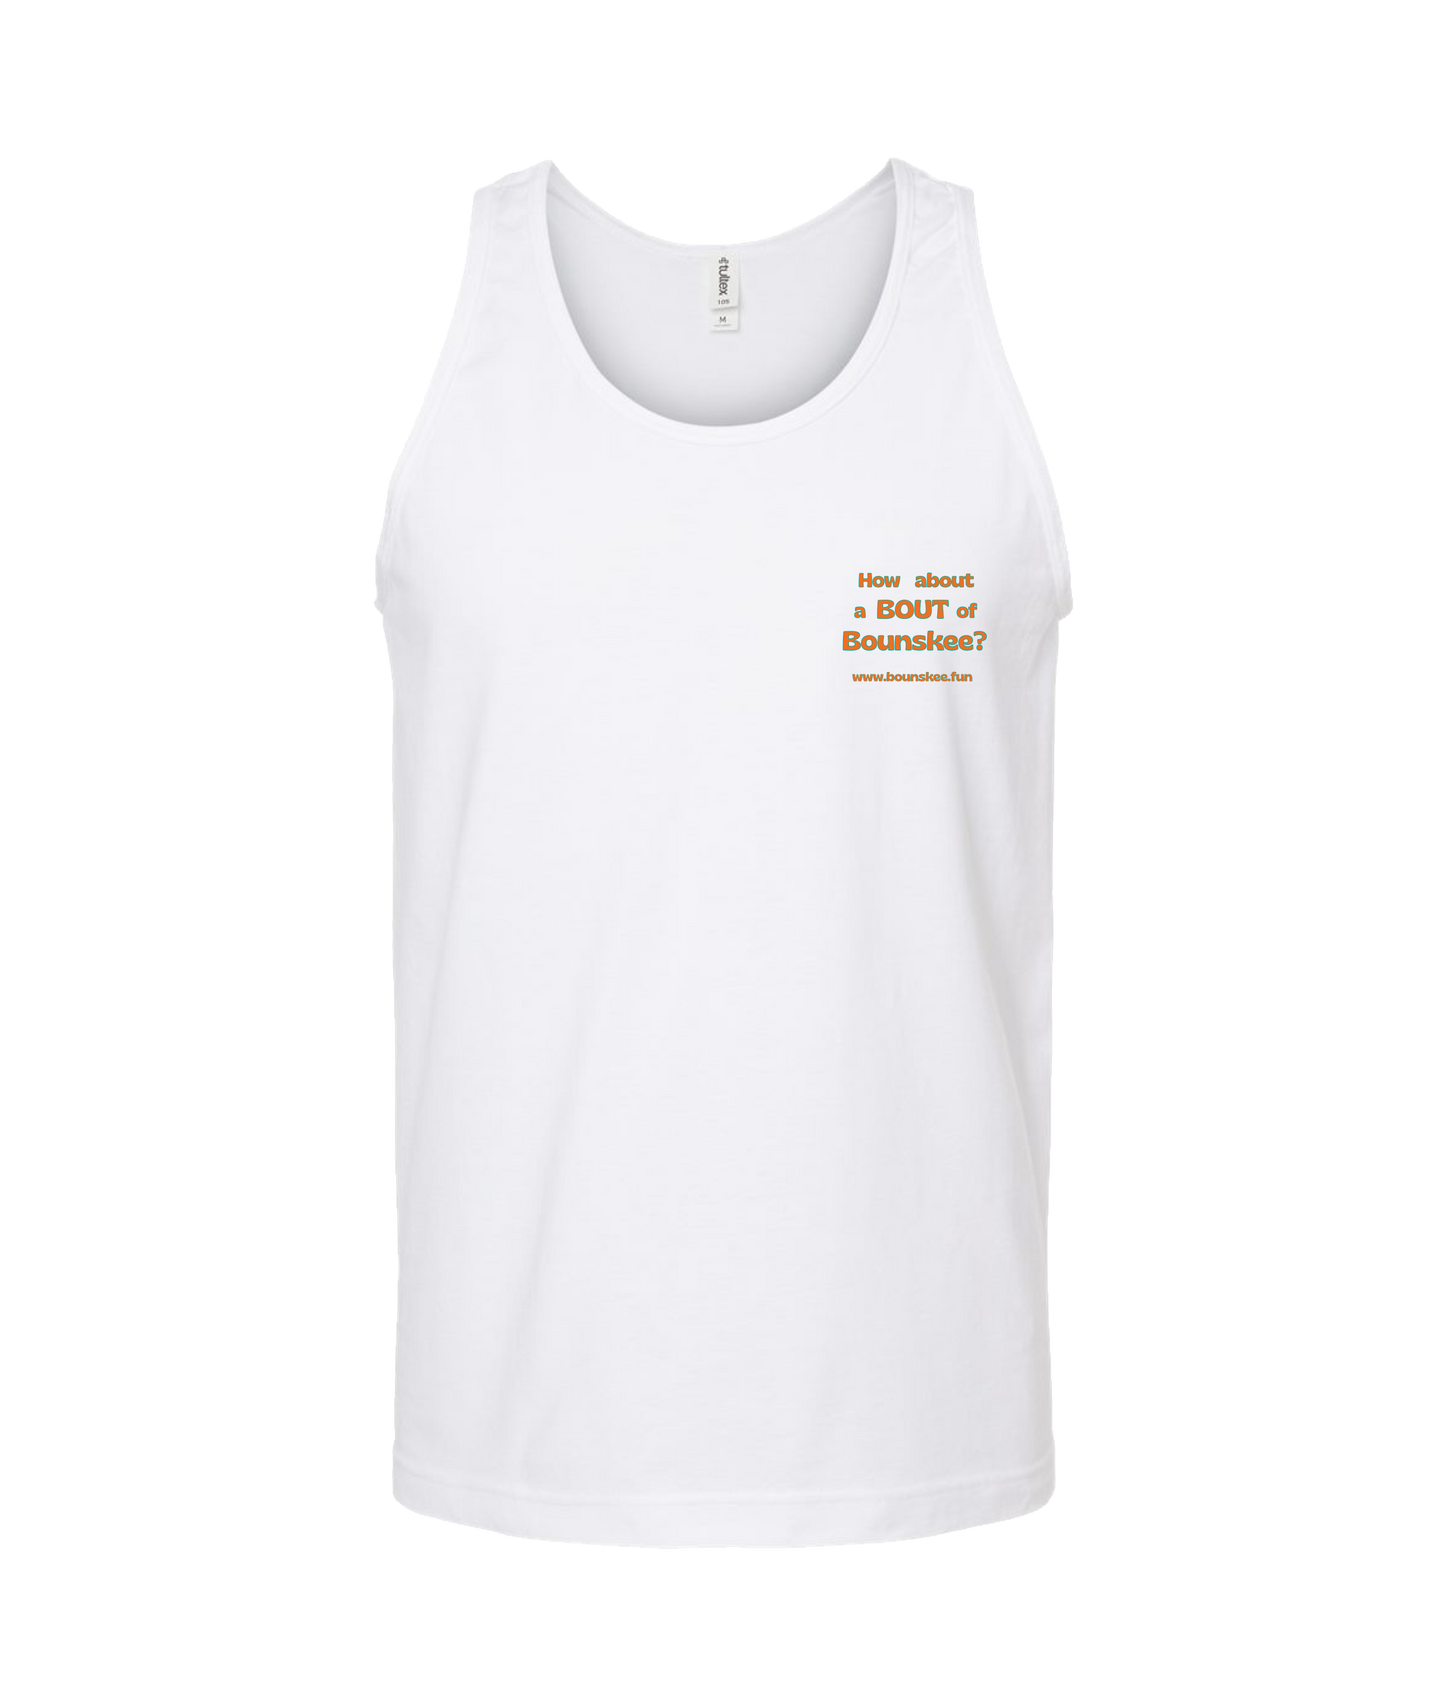 Bounskee - How About A Bout - White Tank Top